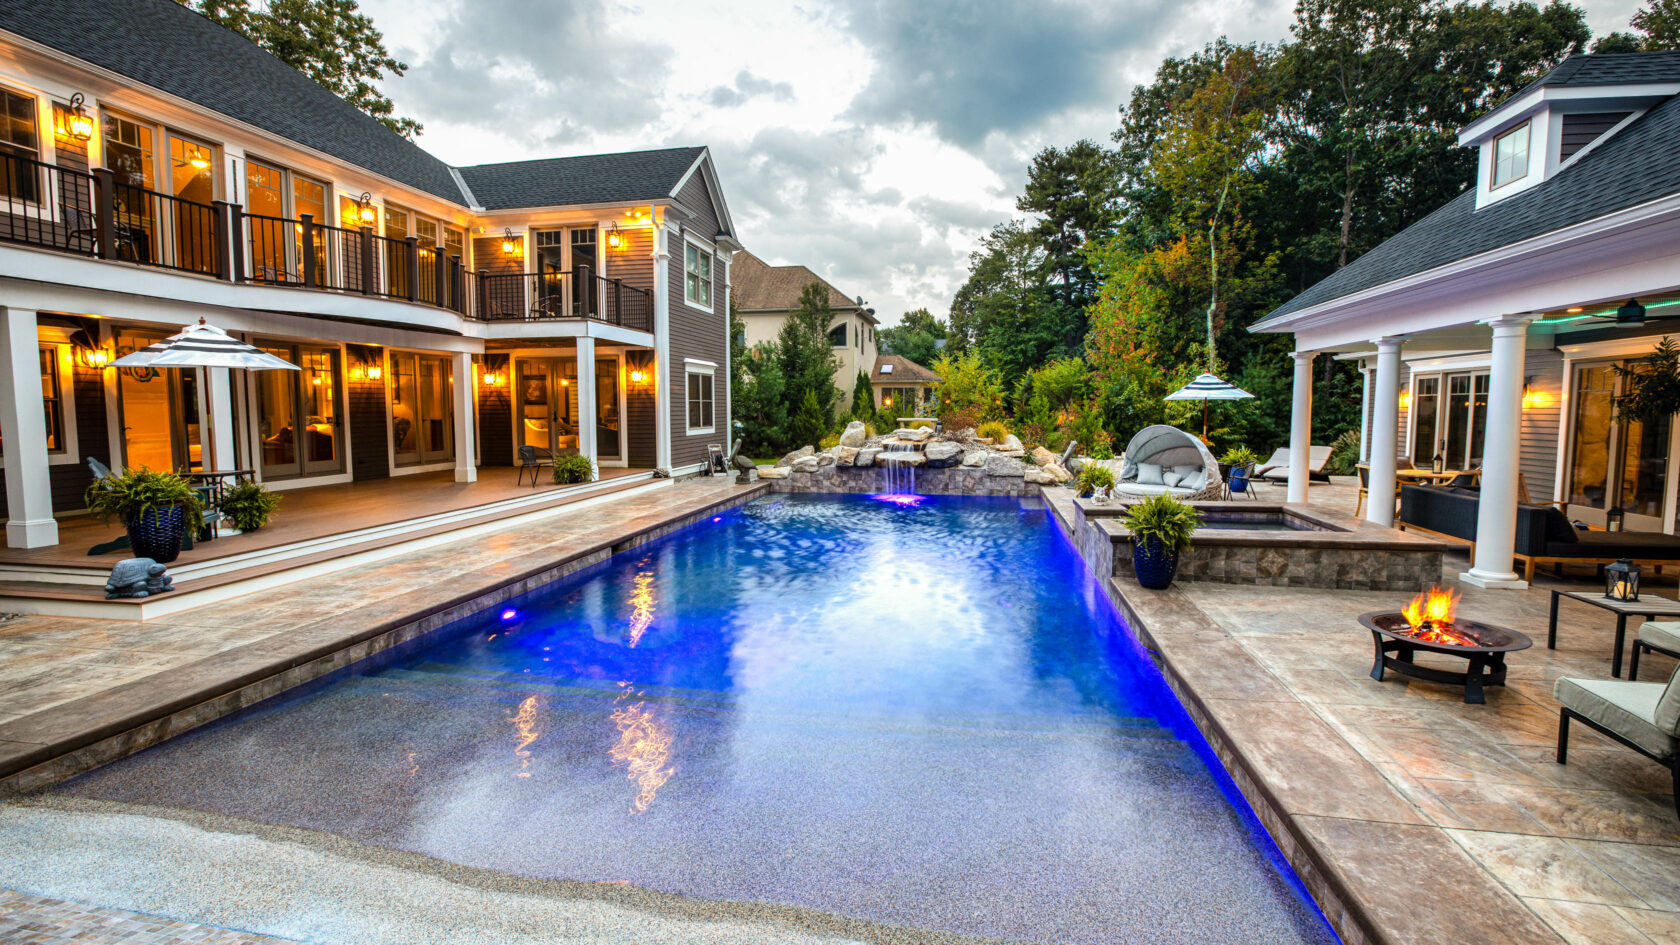 Stamped concrete pool deck, spa, and water fall at a Residential Landscape Design & Build Project in Massachusetts.